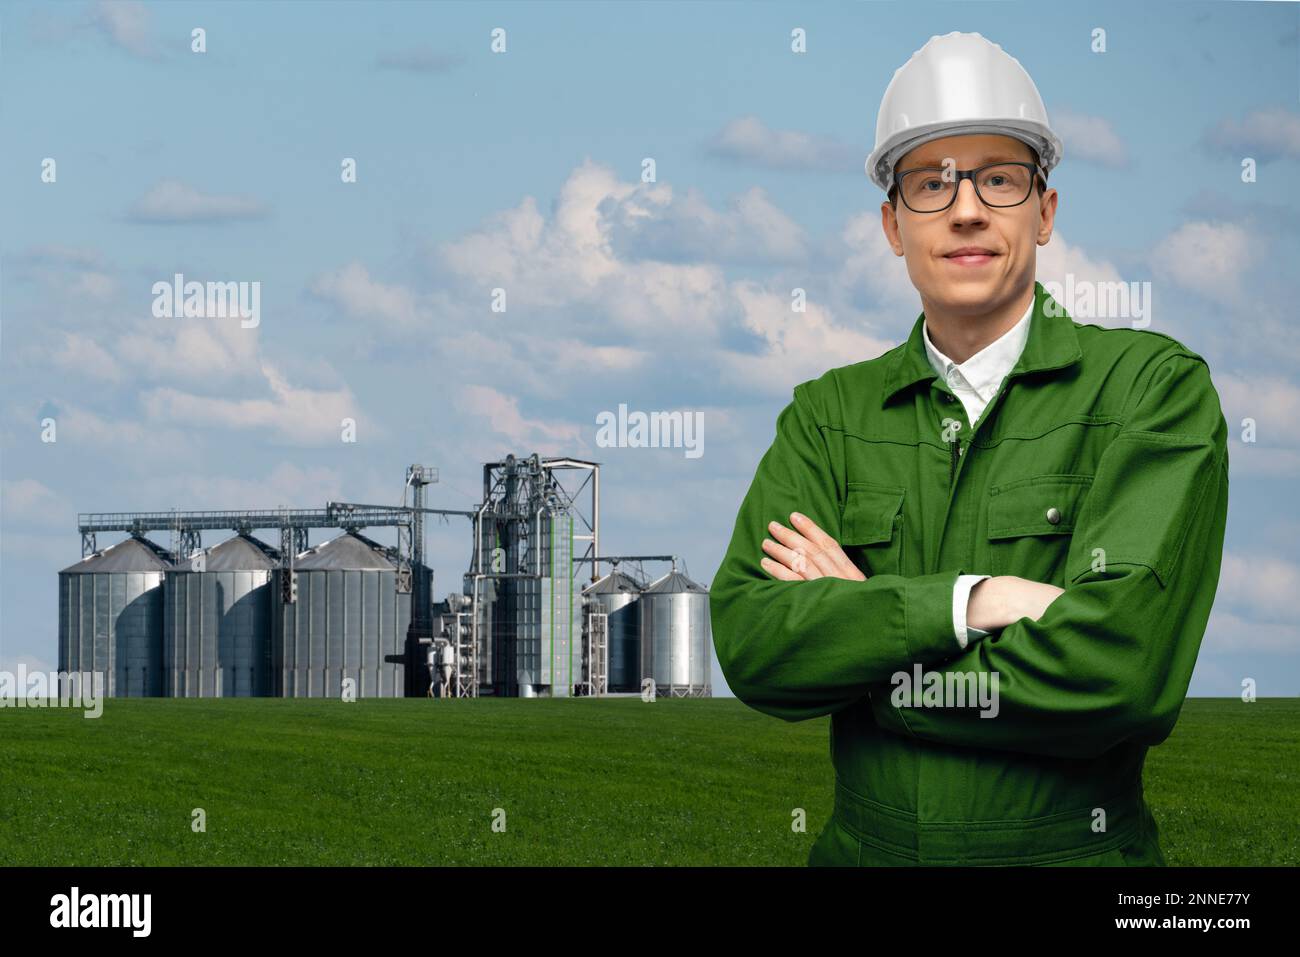 Engineer a background of agricultural silos for biofuel production Stock Photo